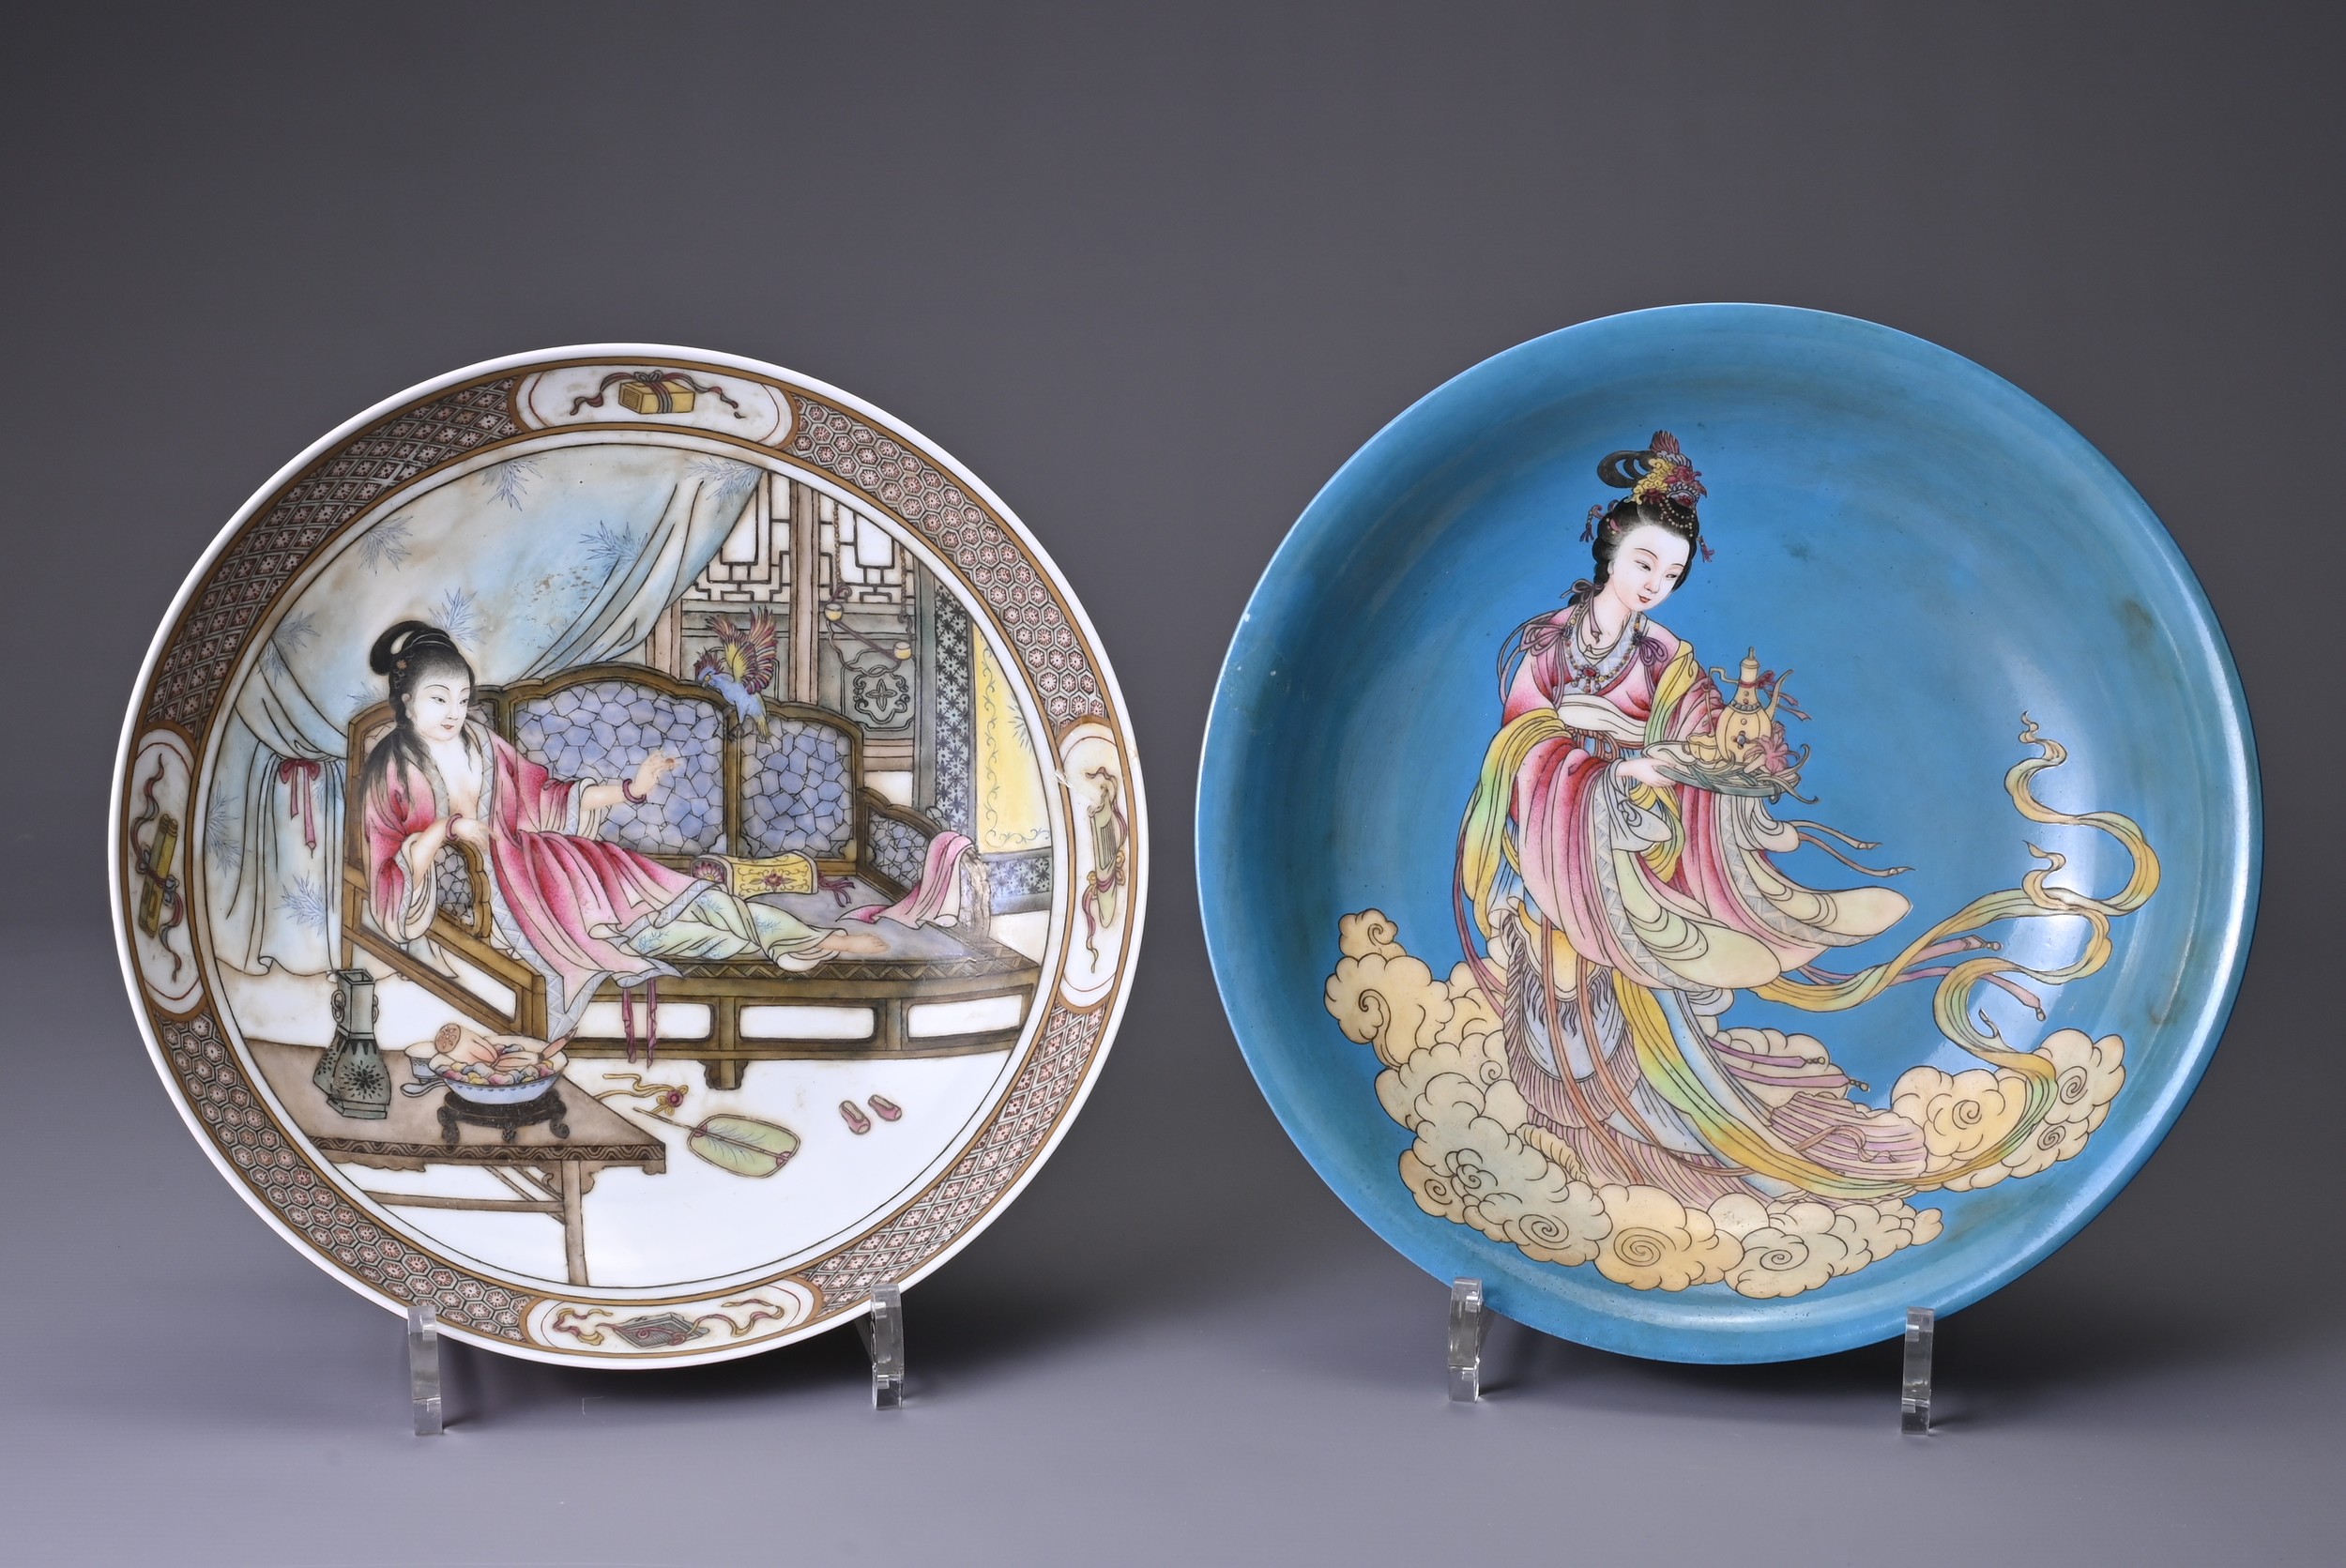 TWO CHINESE PORCELAIN FAMILLE ROSE CIRCULAR DISHES, 20TH CENTURY. Each with iron-red enamel and gilt